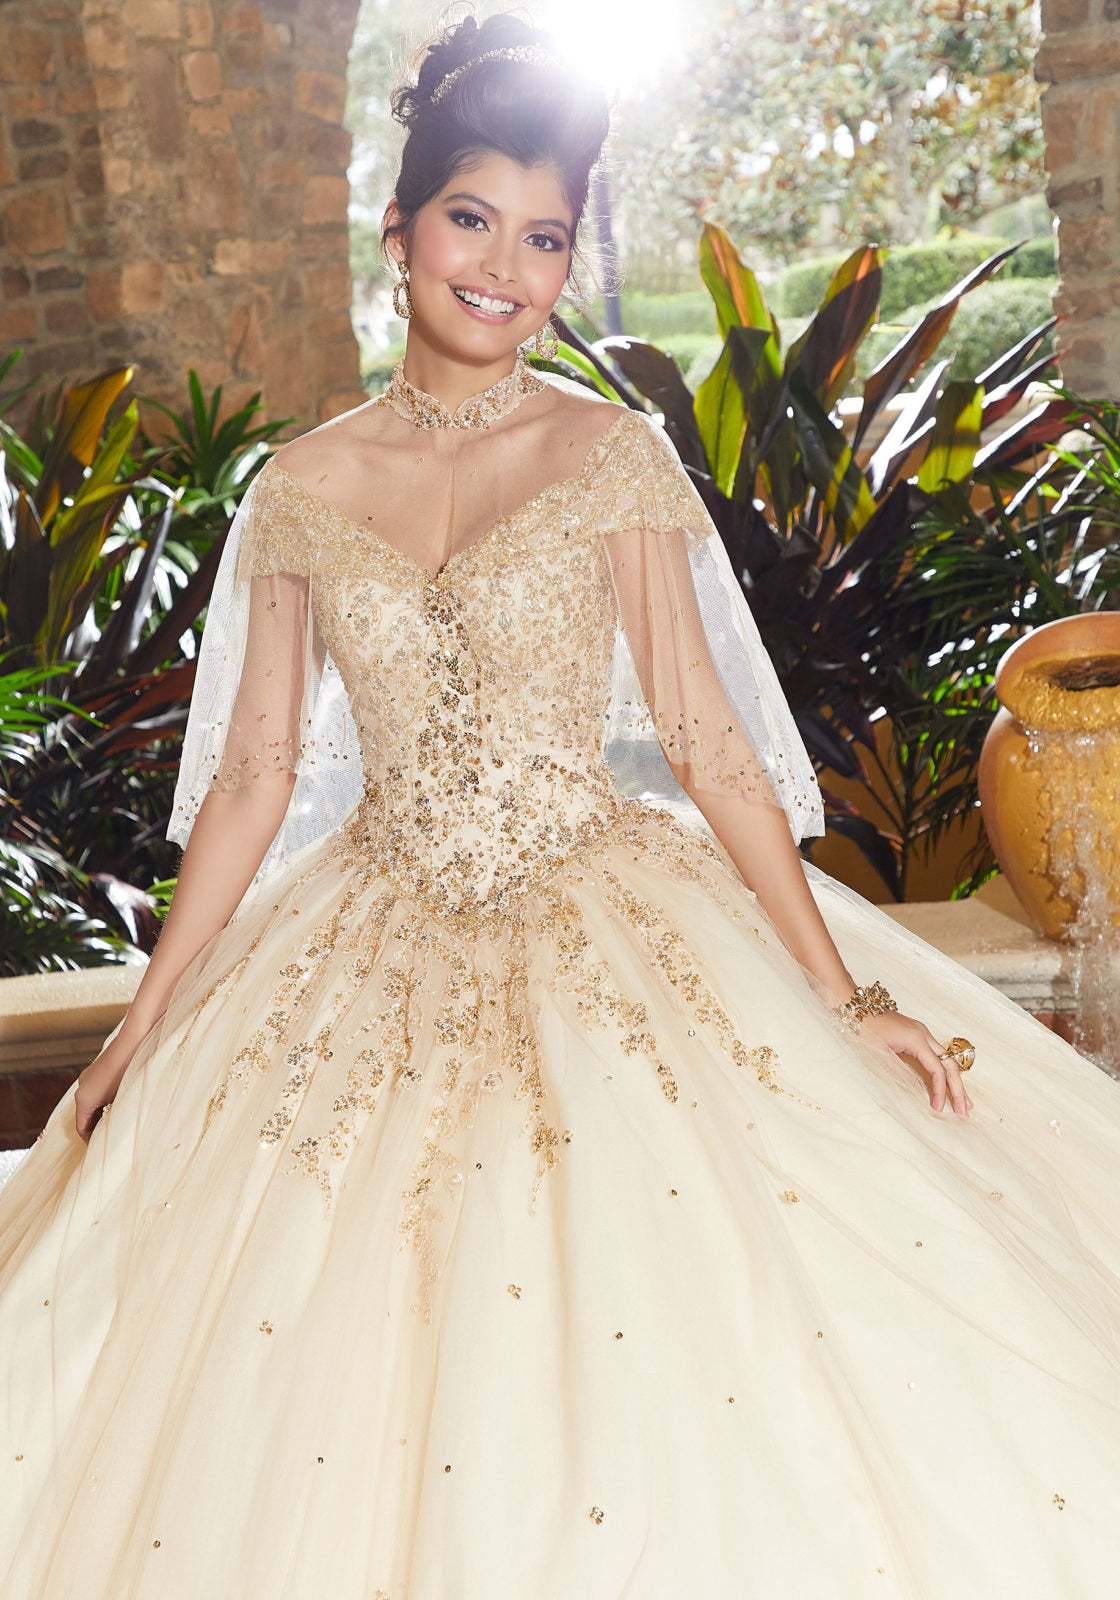 Contrasting Crystal Beaded Embroidery on a Tulle Ballgown